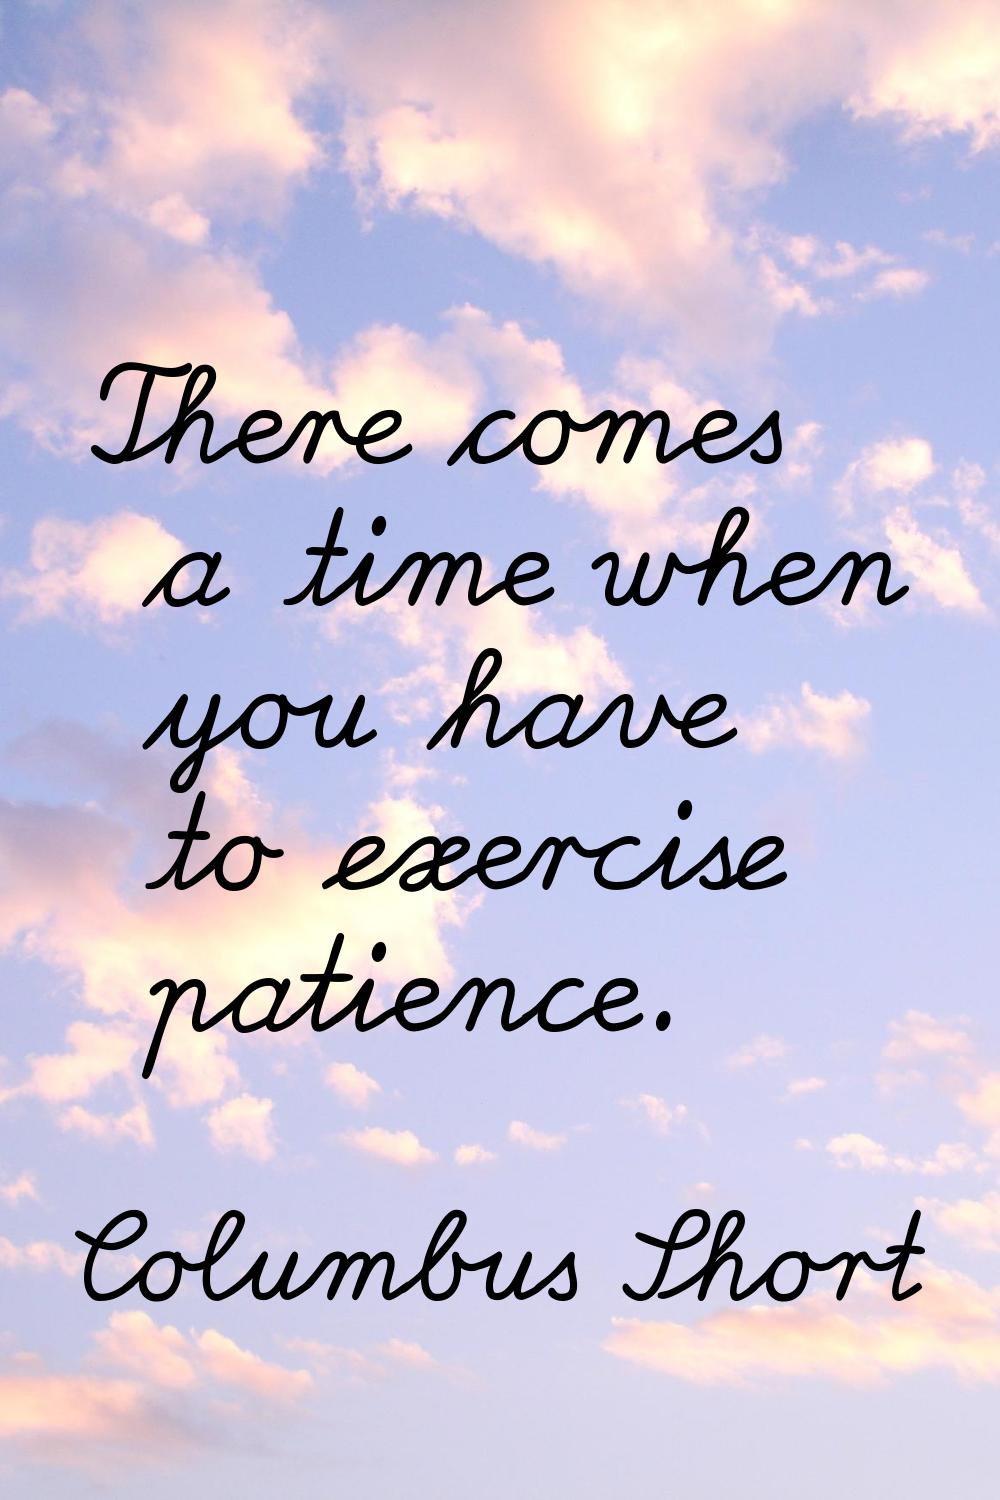 There comes a time when you have to exercise patience.